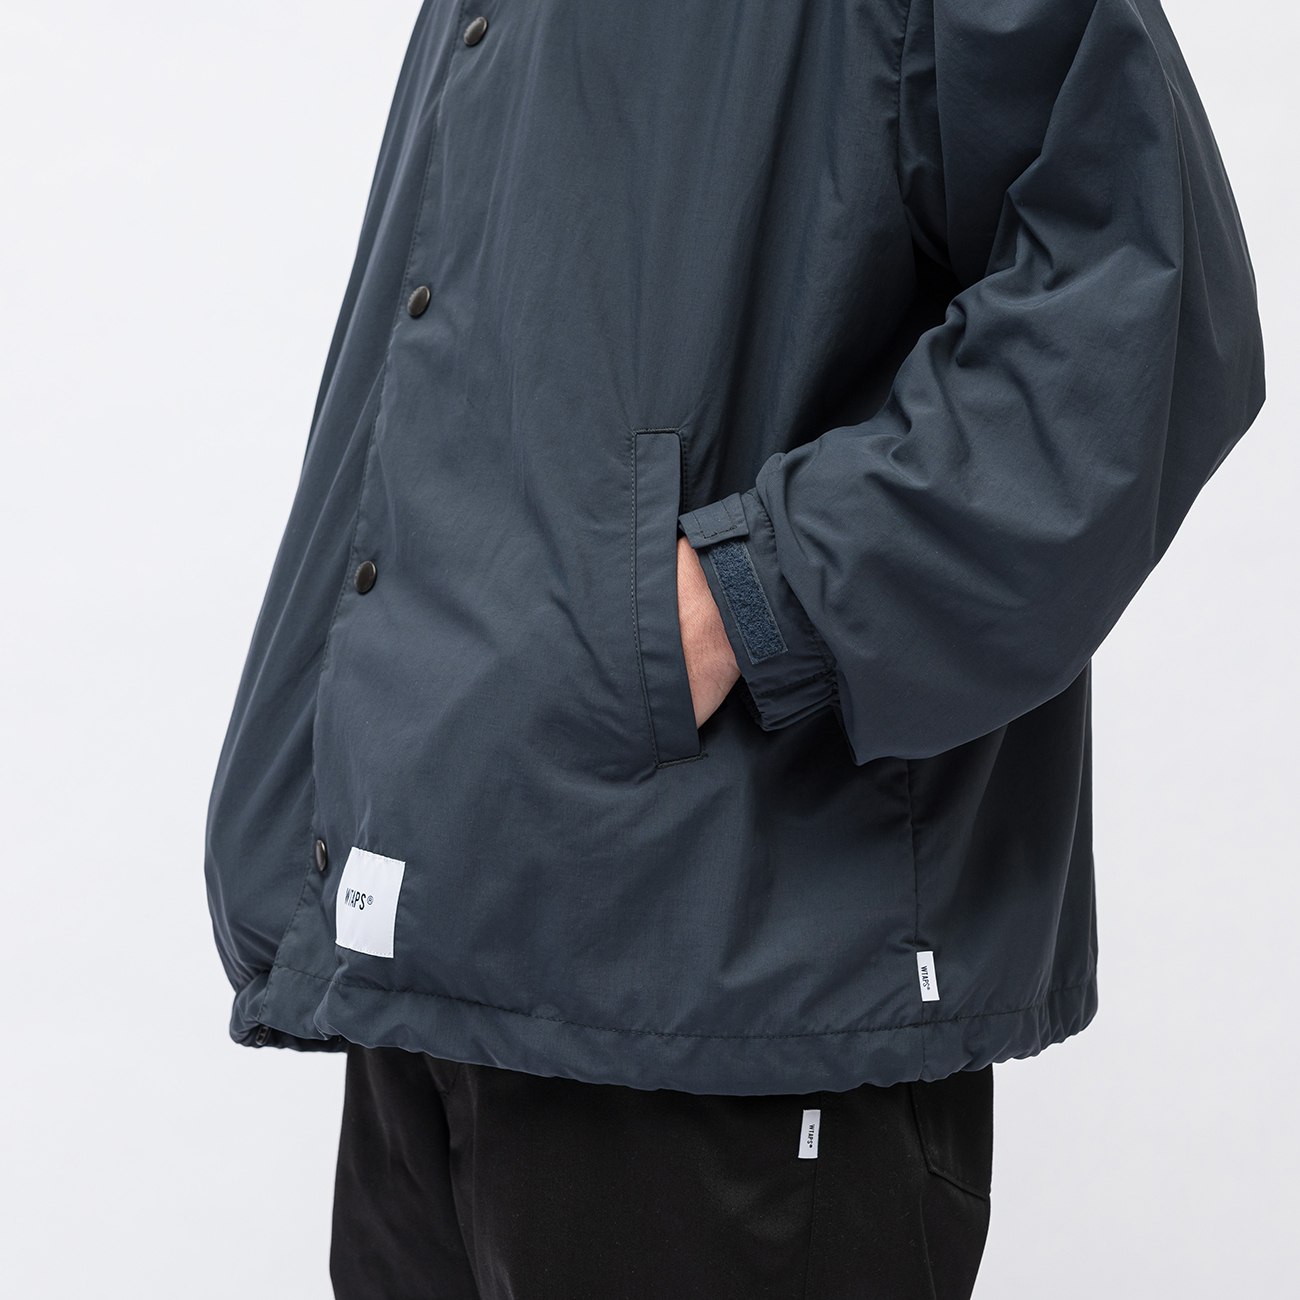 SEAL限定商品】 CHIEF wtaps / WEATHER. NYLON. / JACKET ミリタリー